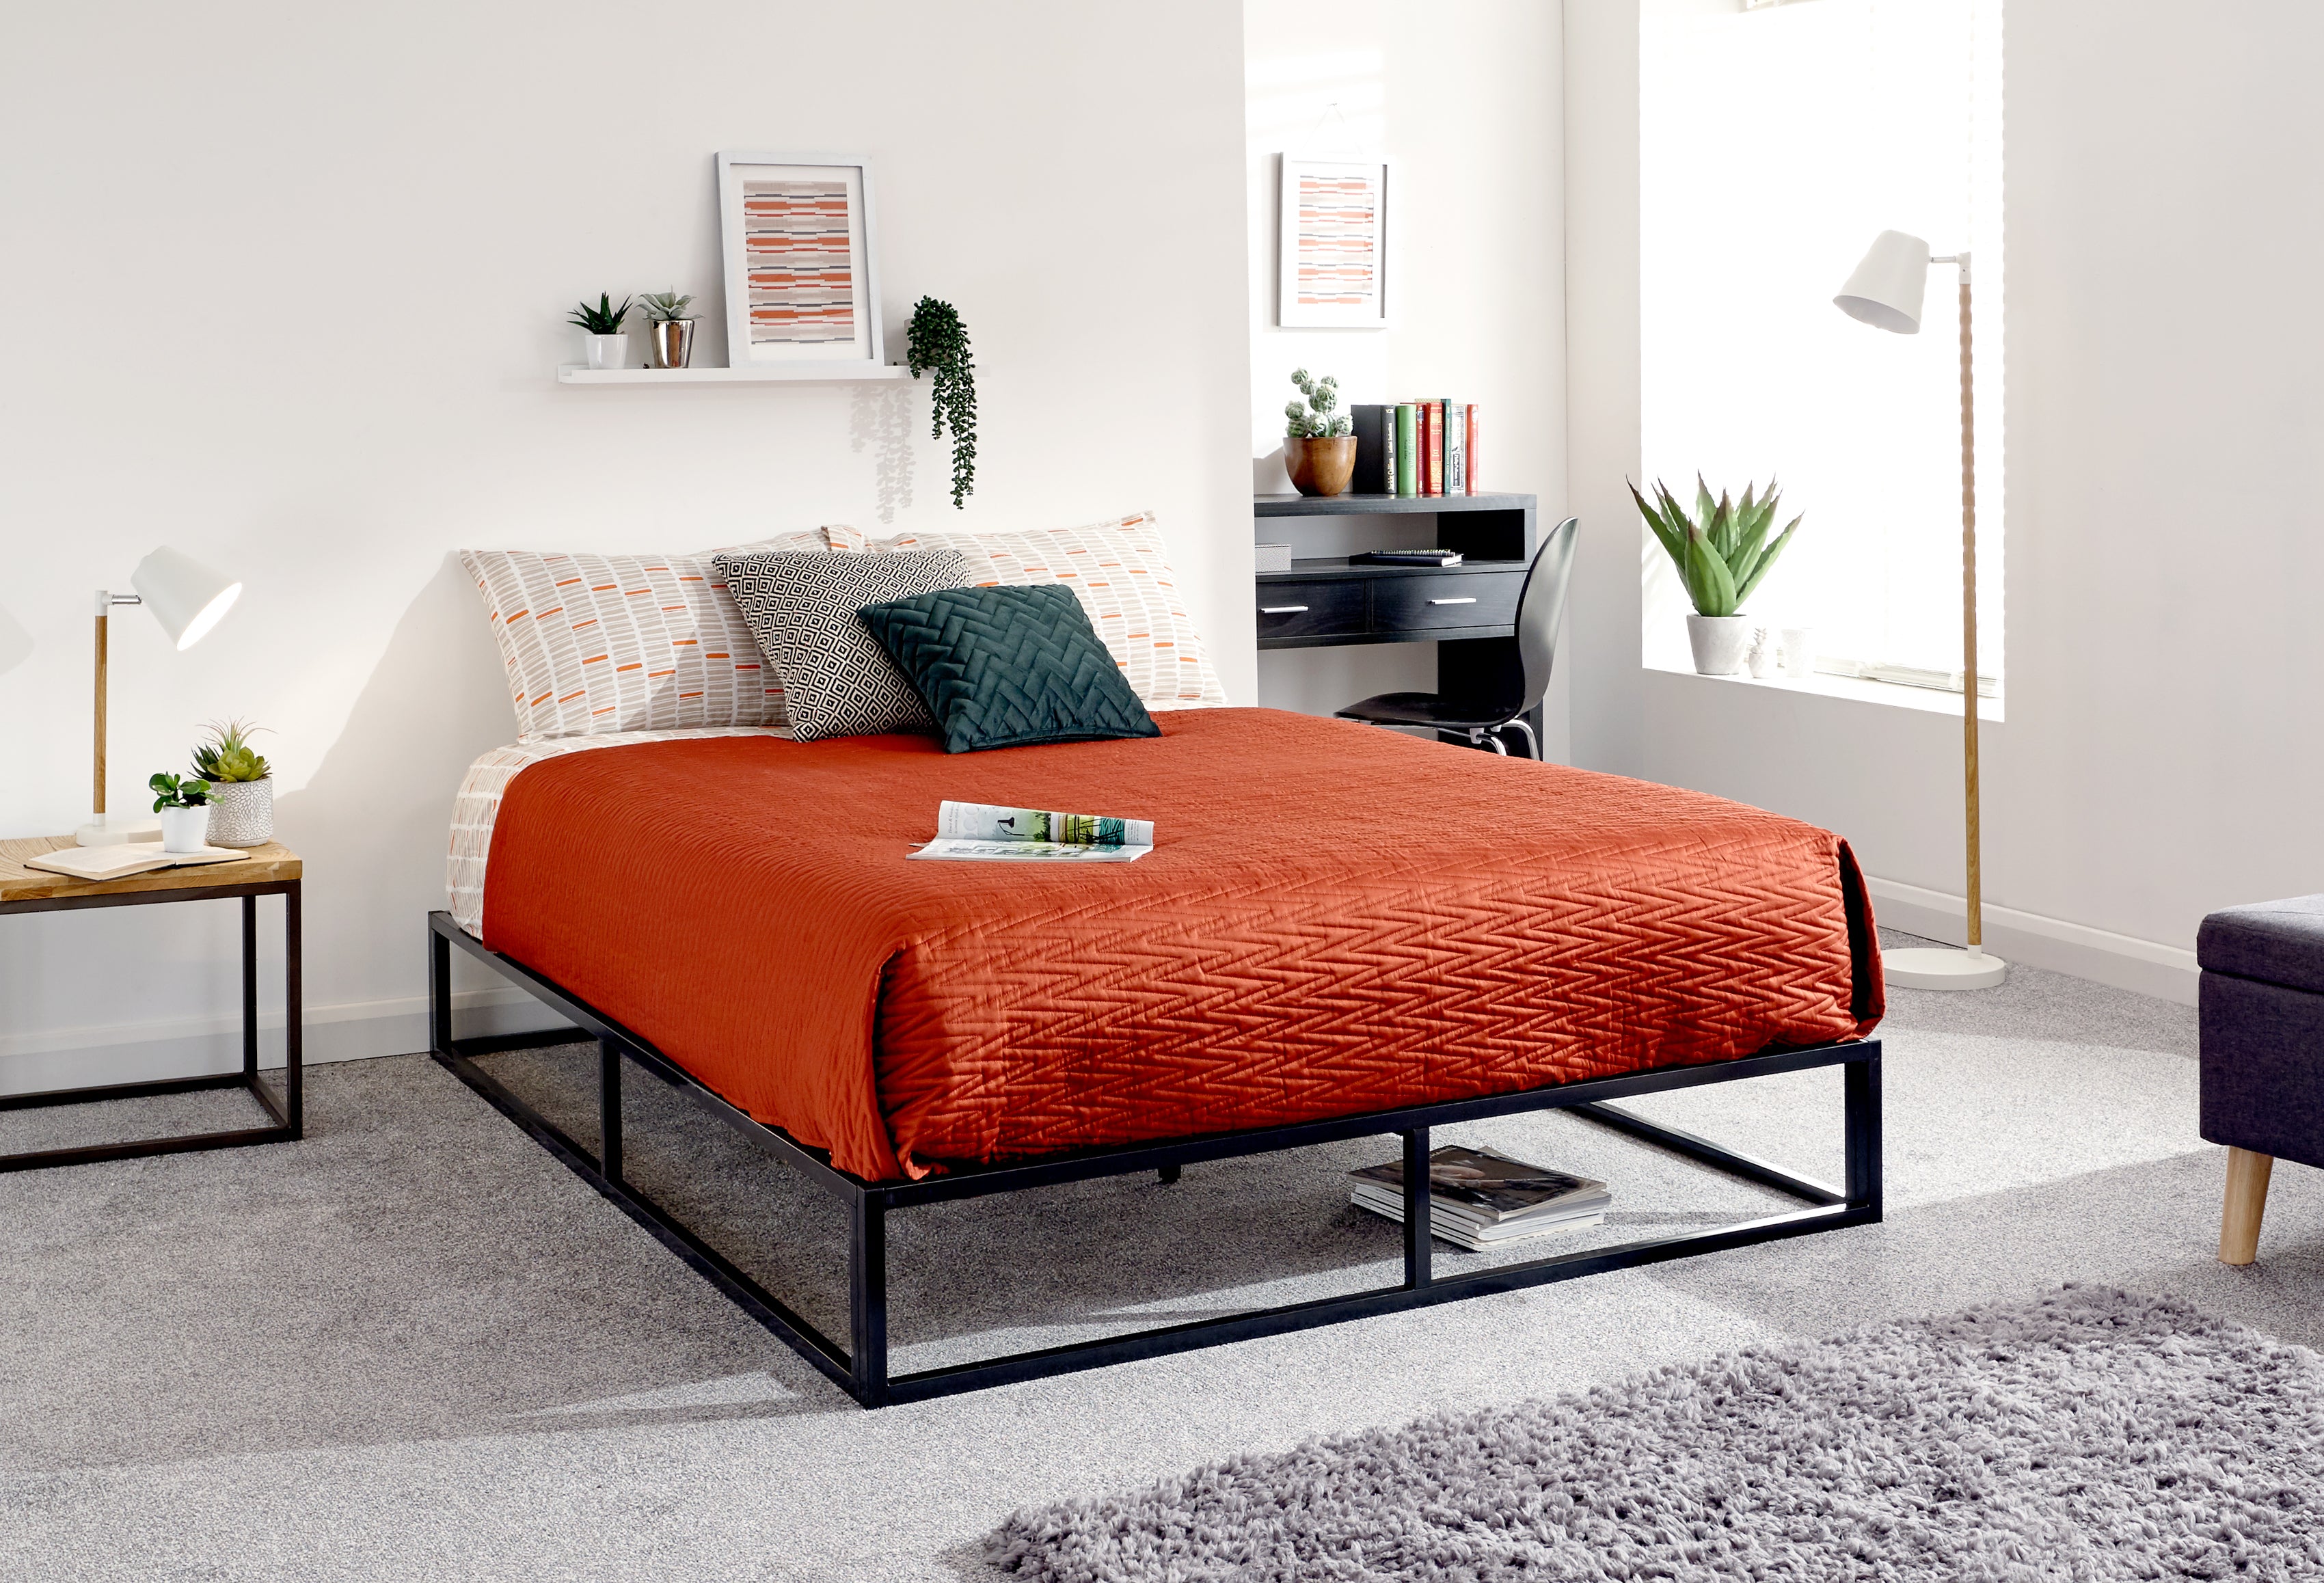 Image of Platform Bed Frame - Available In 2 Sizes